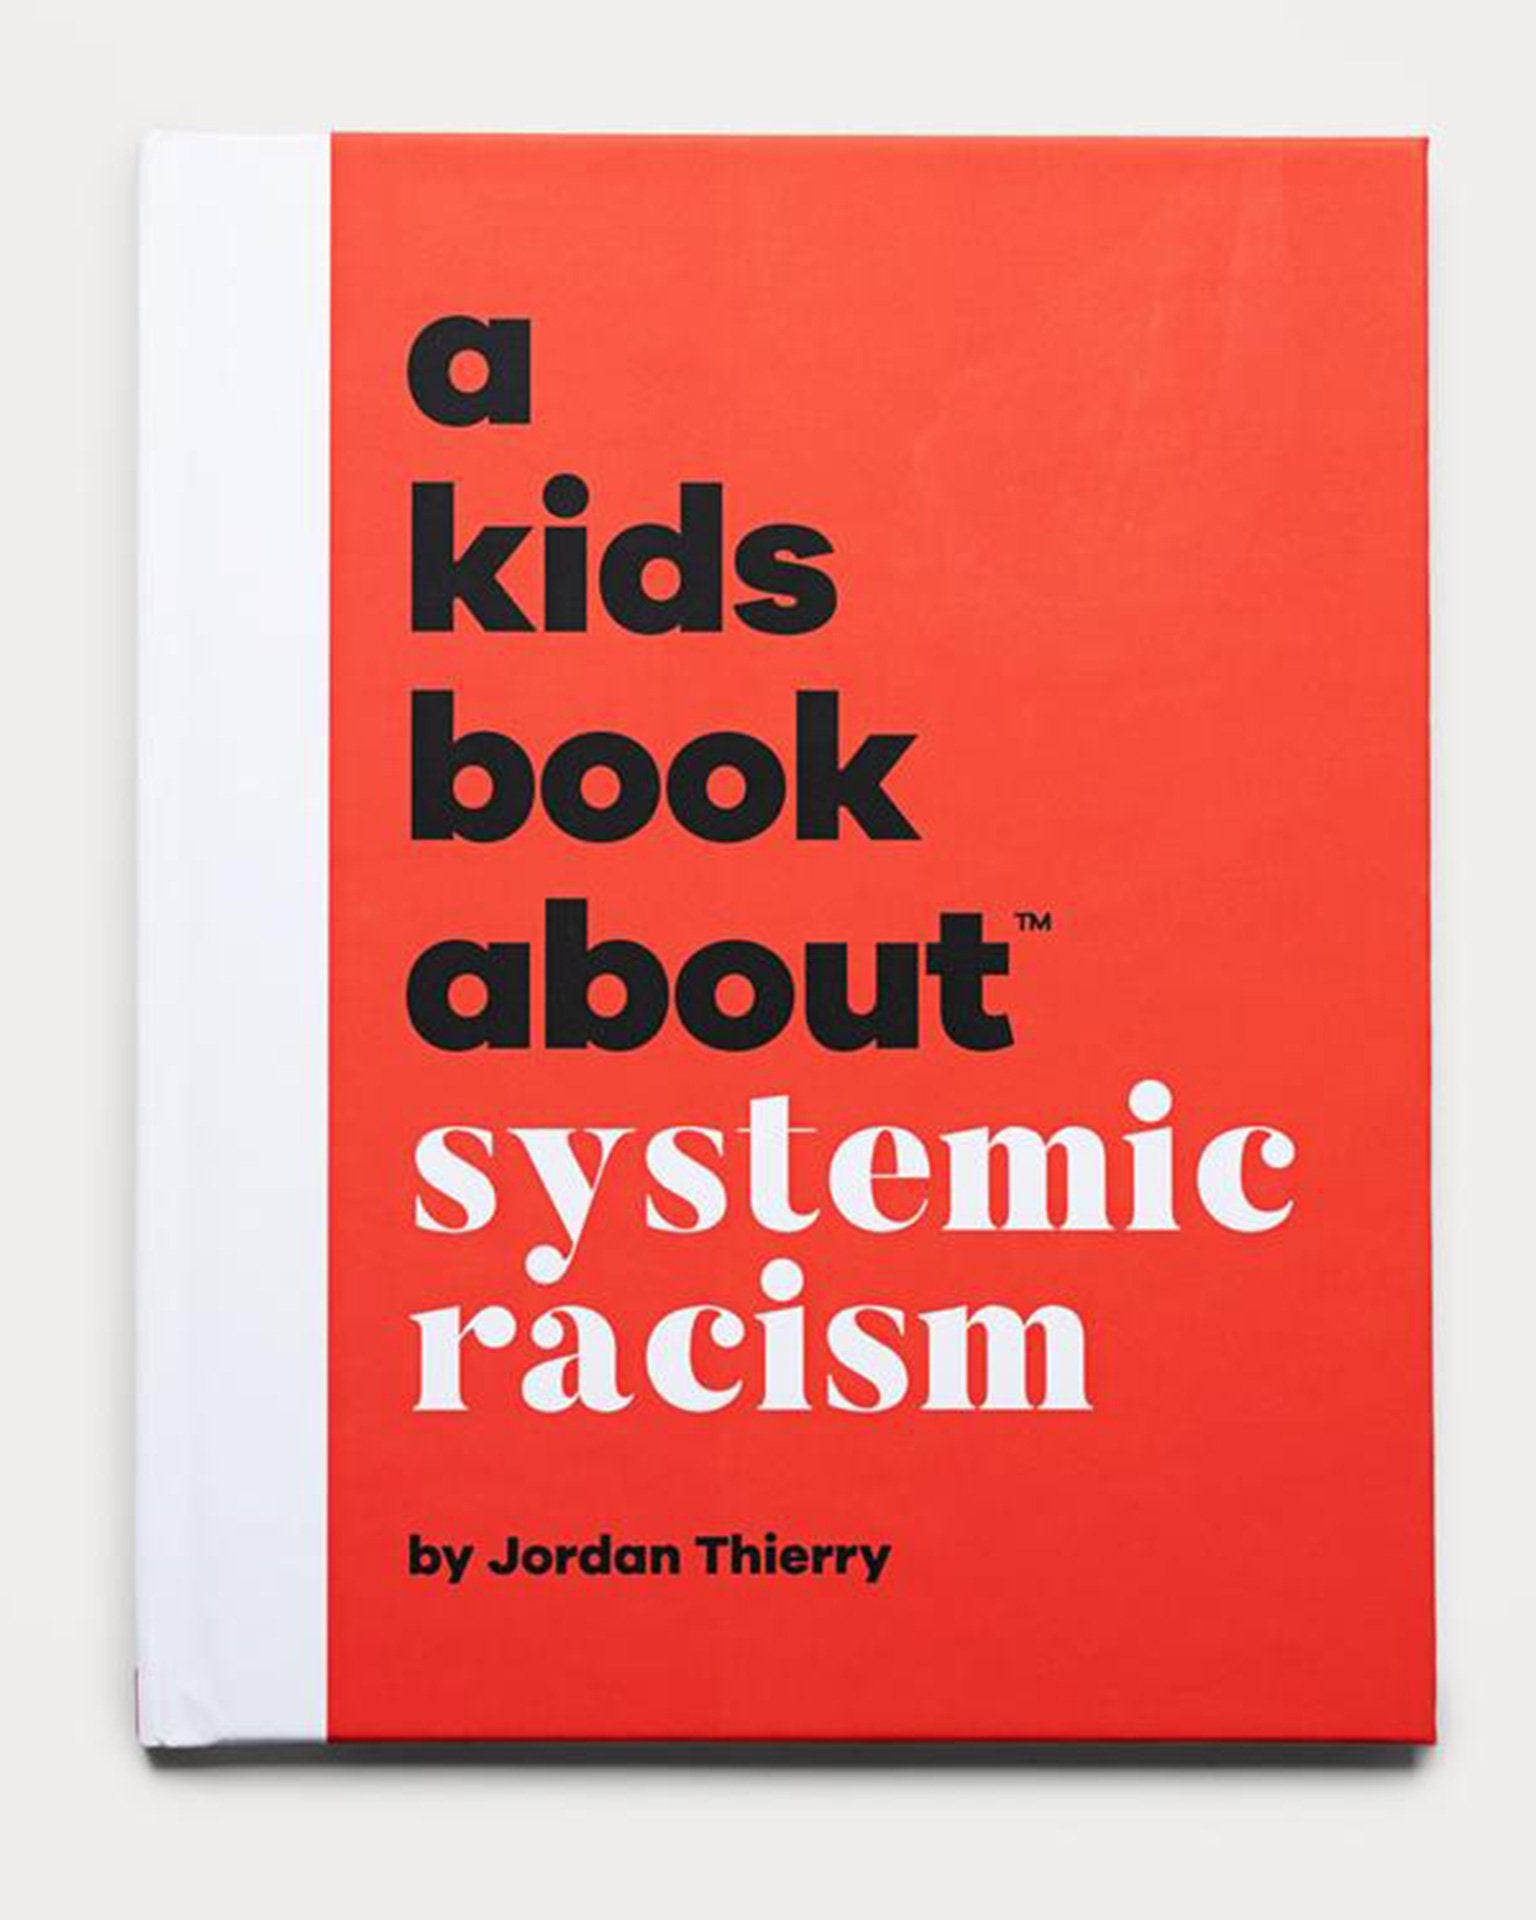 Little a kids book about play a kids book about systemic racism